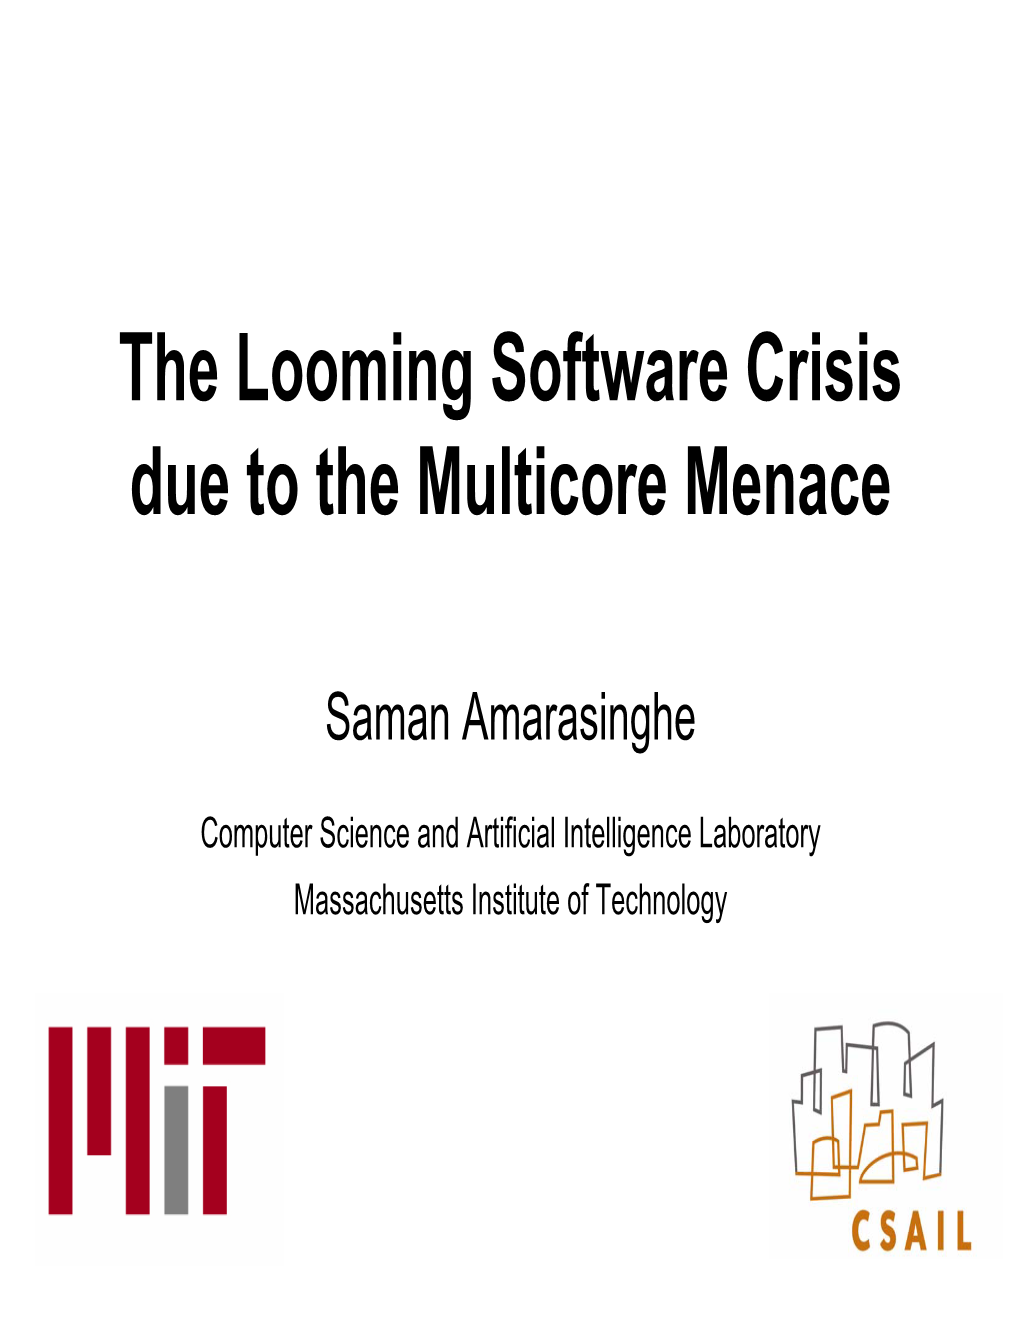 The Looming Software Crisis Due to the Multicore Menace